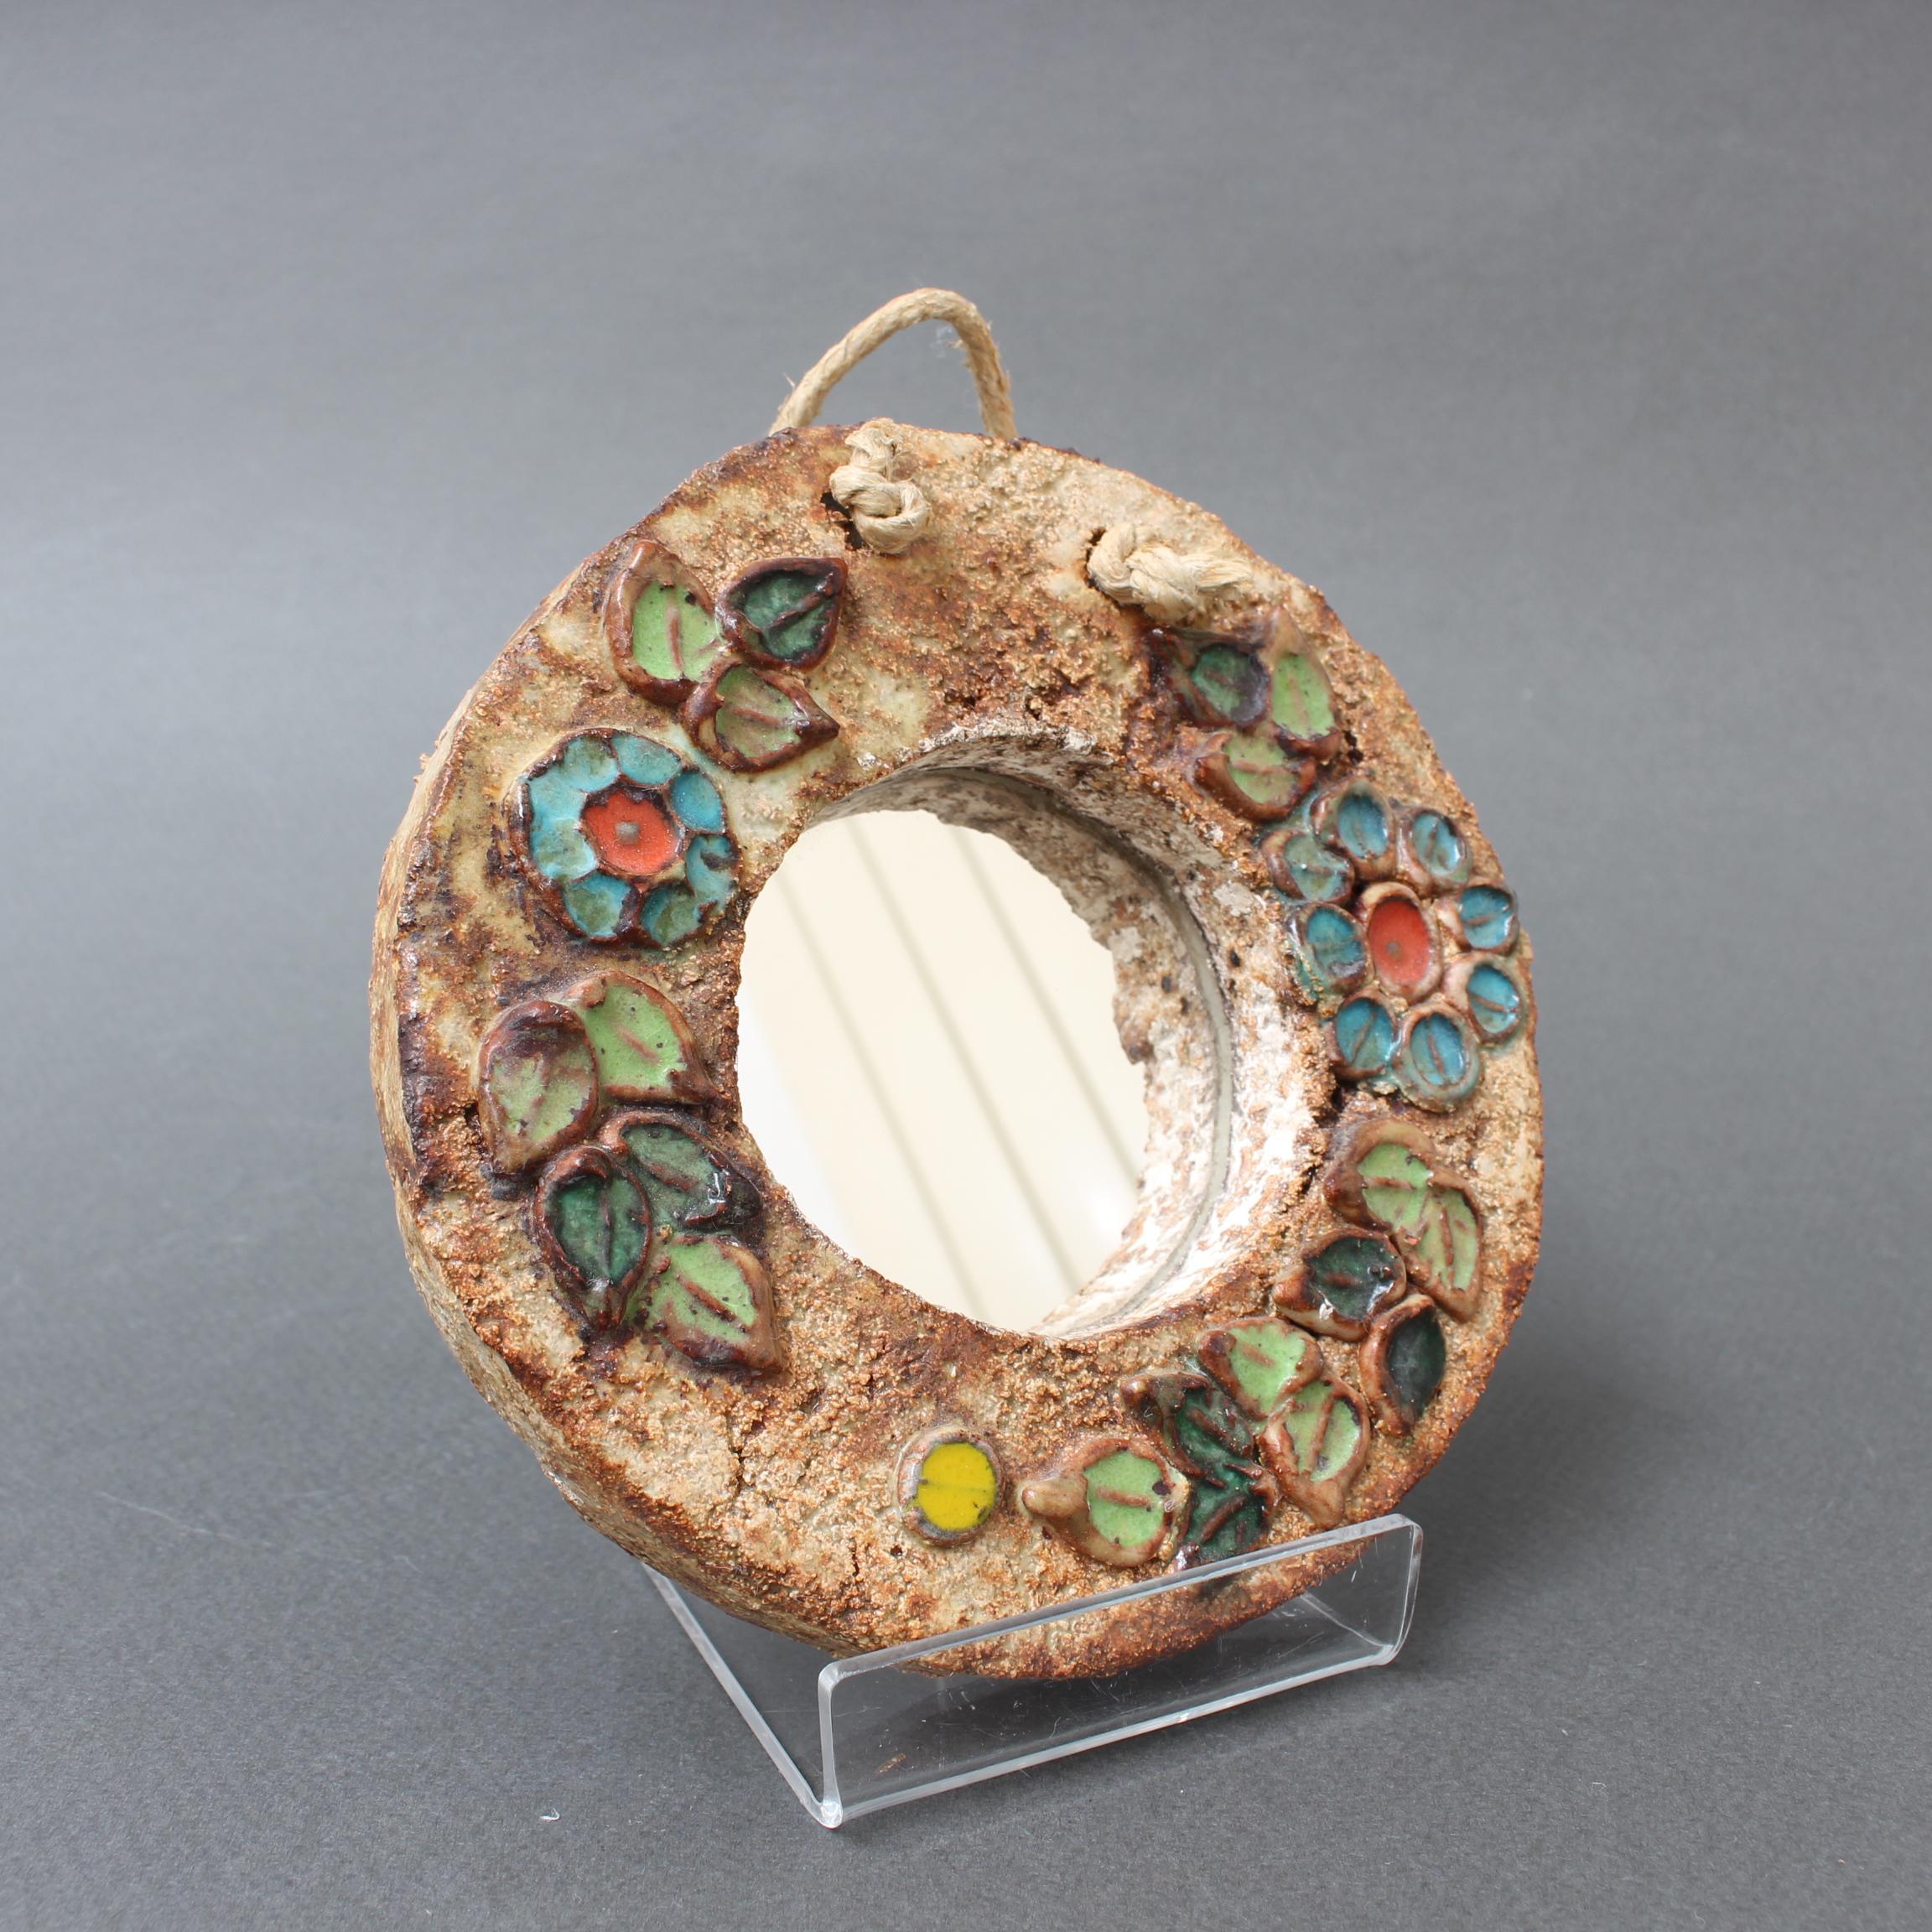 Small ceramic flower-motif mirror with glazed leaves by La Roue, Vallauris, France, (circa 1960s). A charming, decorative mirror with rustic but colorful details surrounding the circular mirror. In good vintage condition commensurate with its age